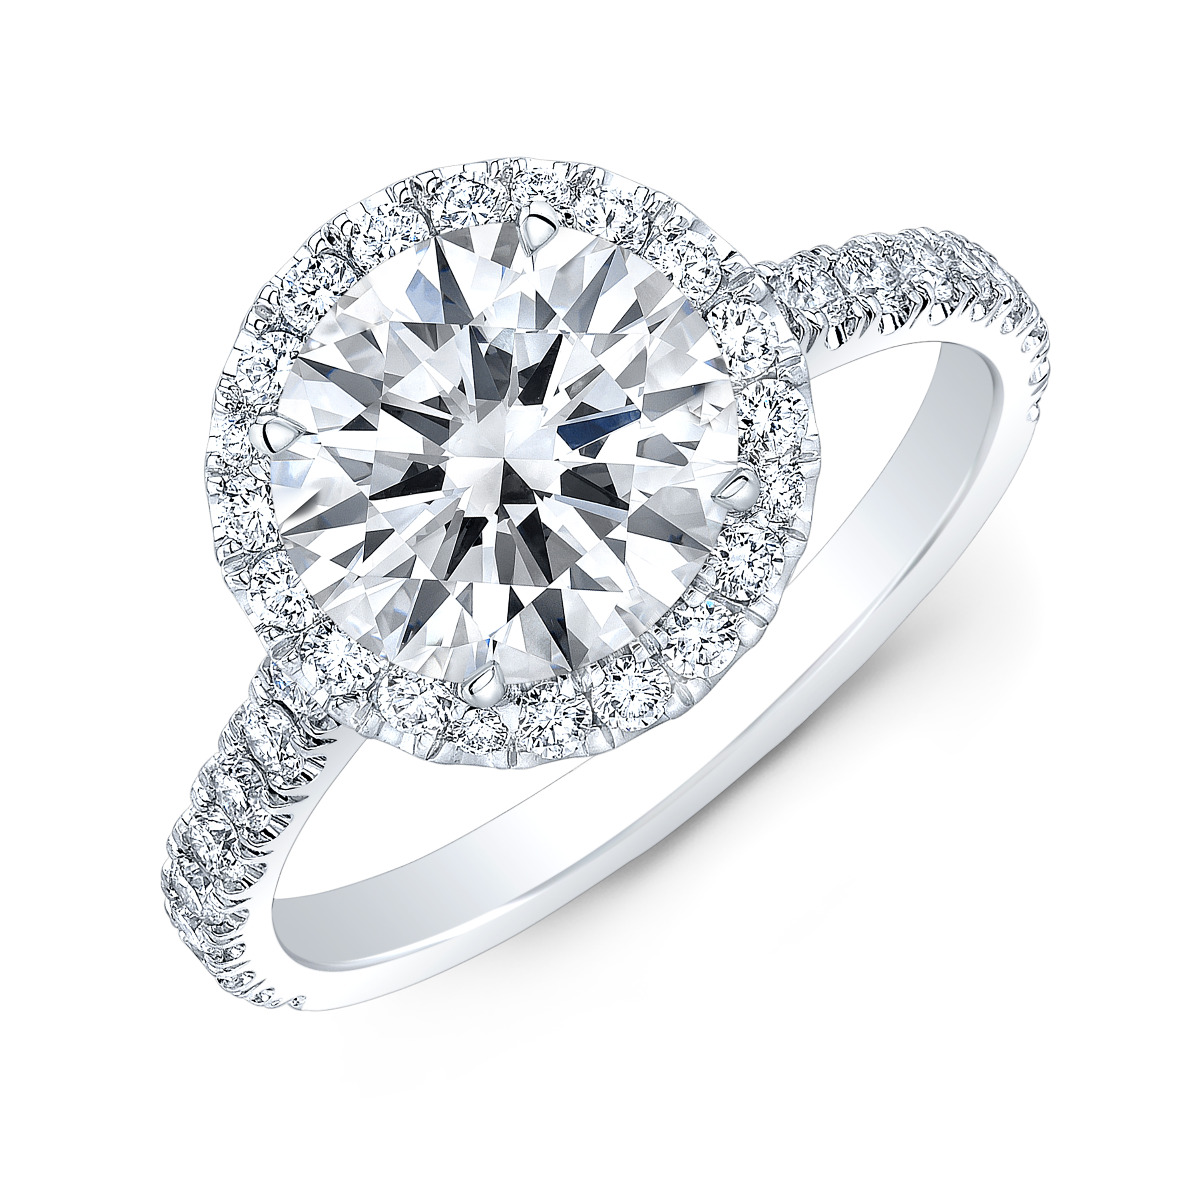 Details about   0.93 Ct Natural Round Cut White Diamond Halo Engagement Ring 925 Sterling Silver